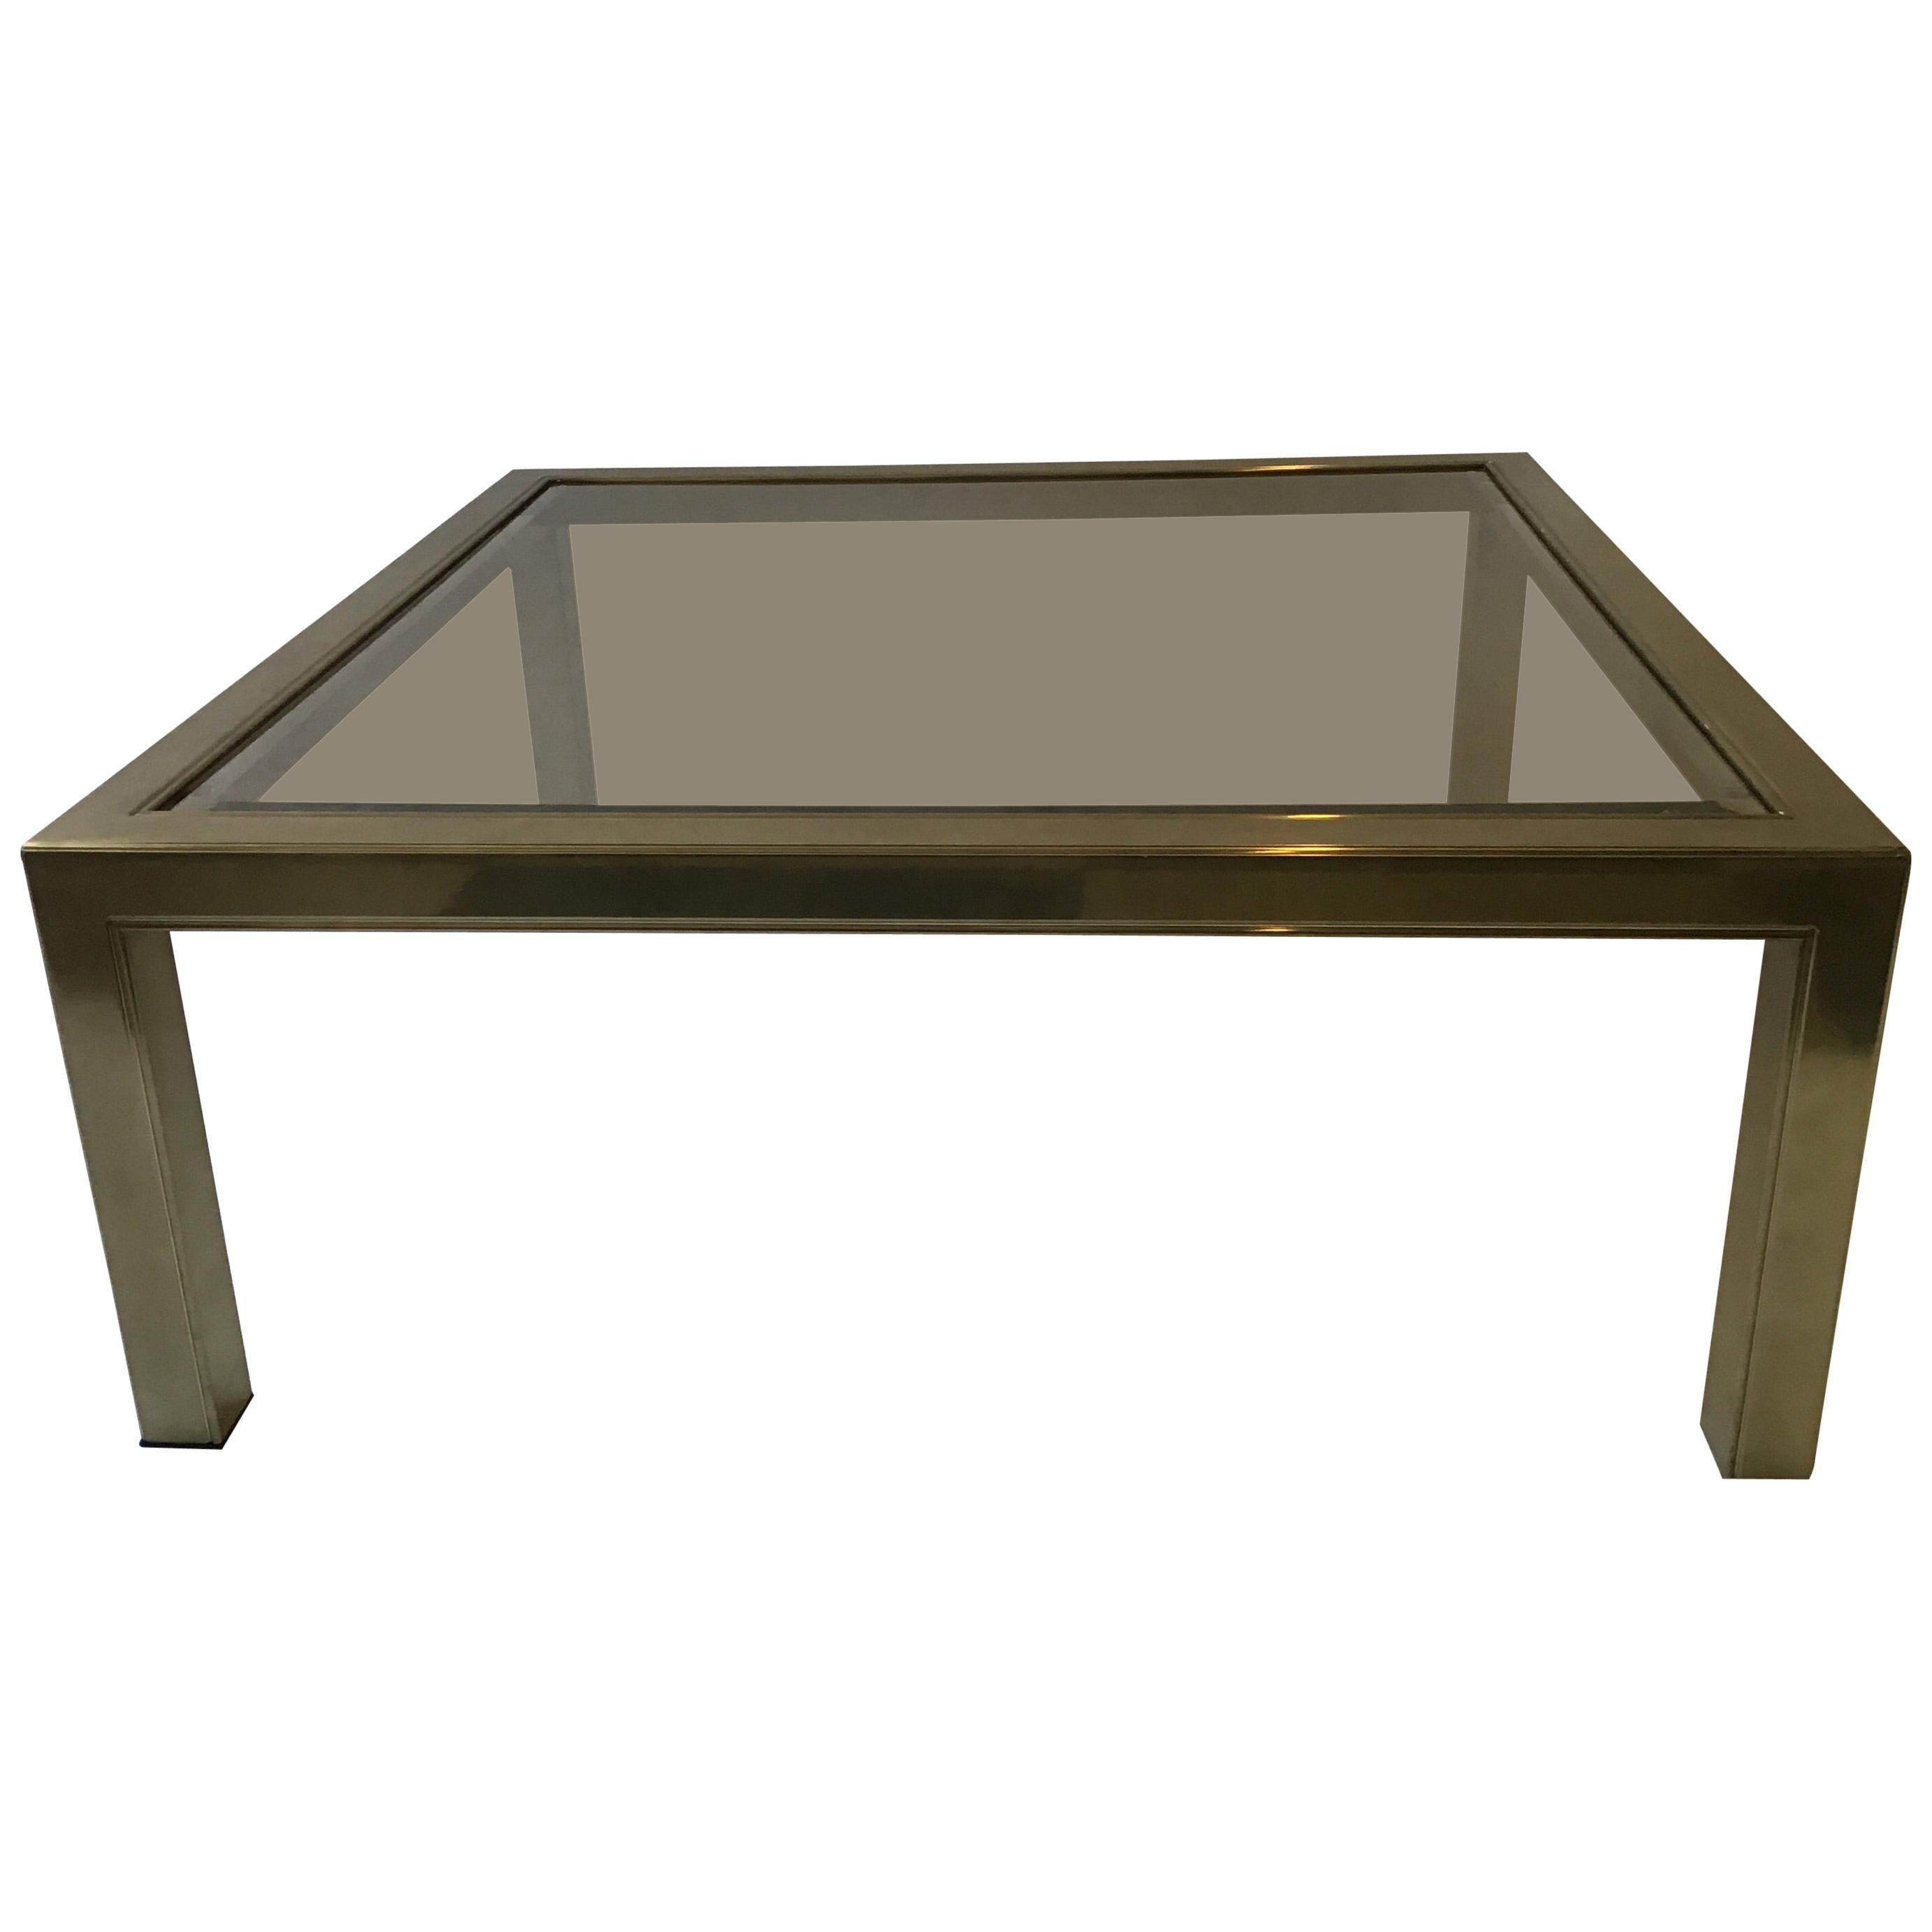 1970s Brass Plated / Glass Top Square Coffee Table